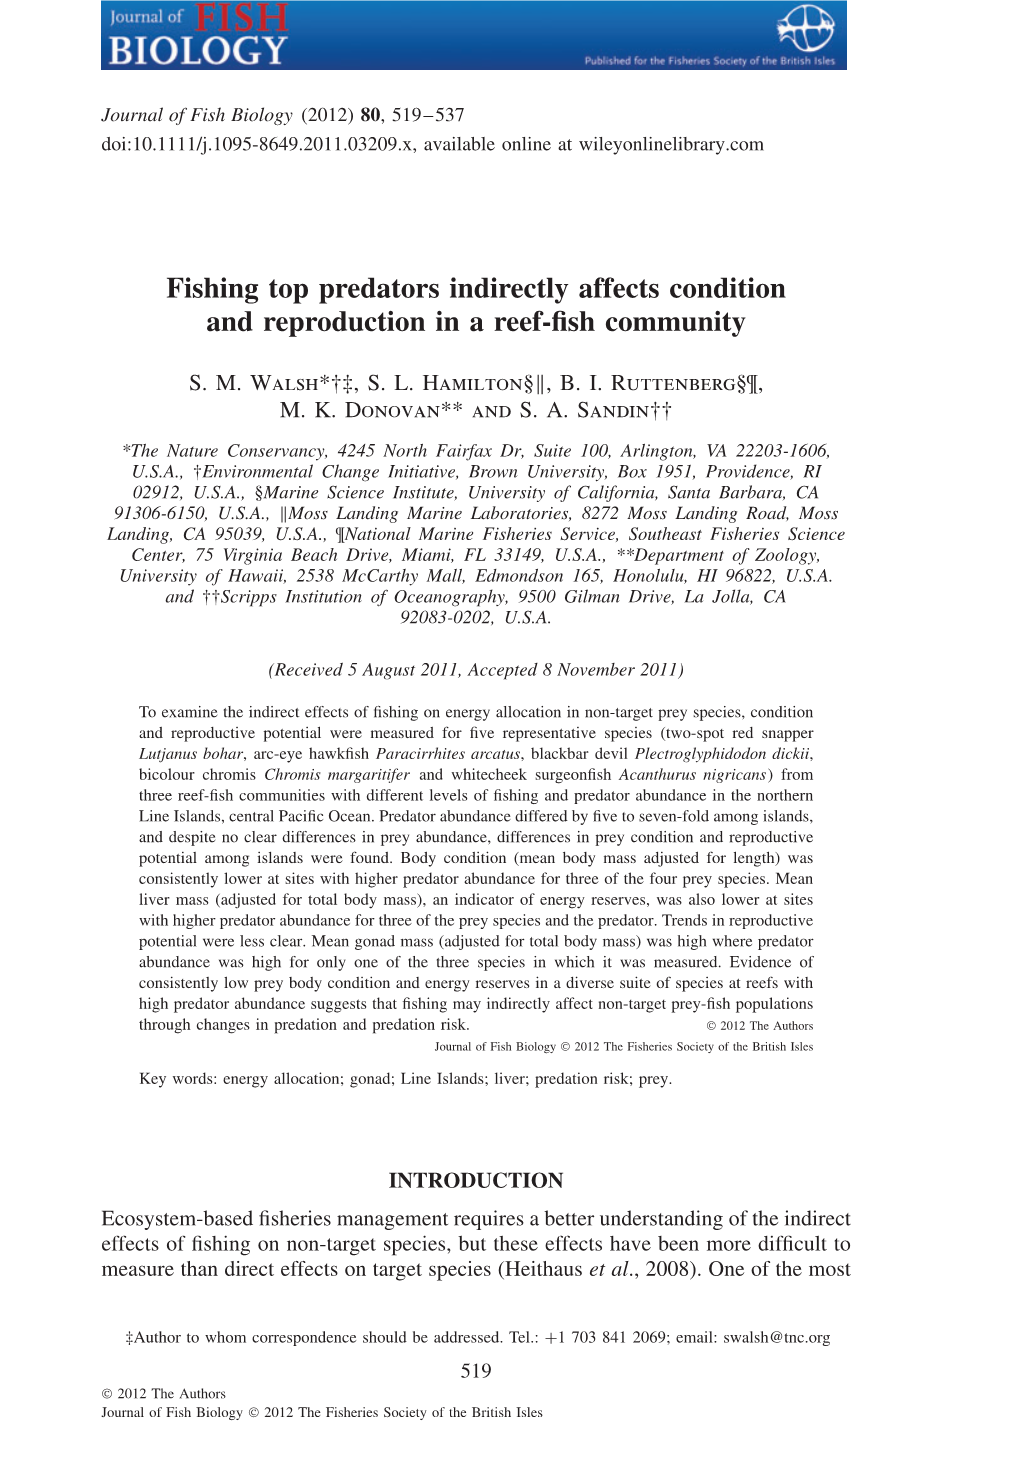 Fishing Top Predators Indirectly Affects Condition and Reproduction in a Reef-ﬁsh Community